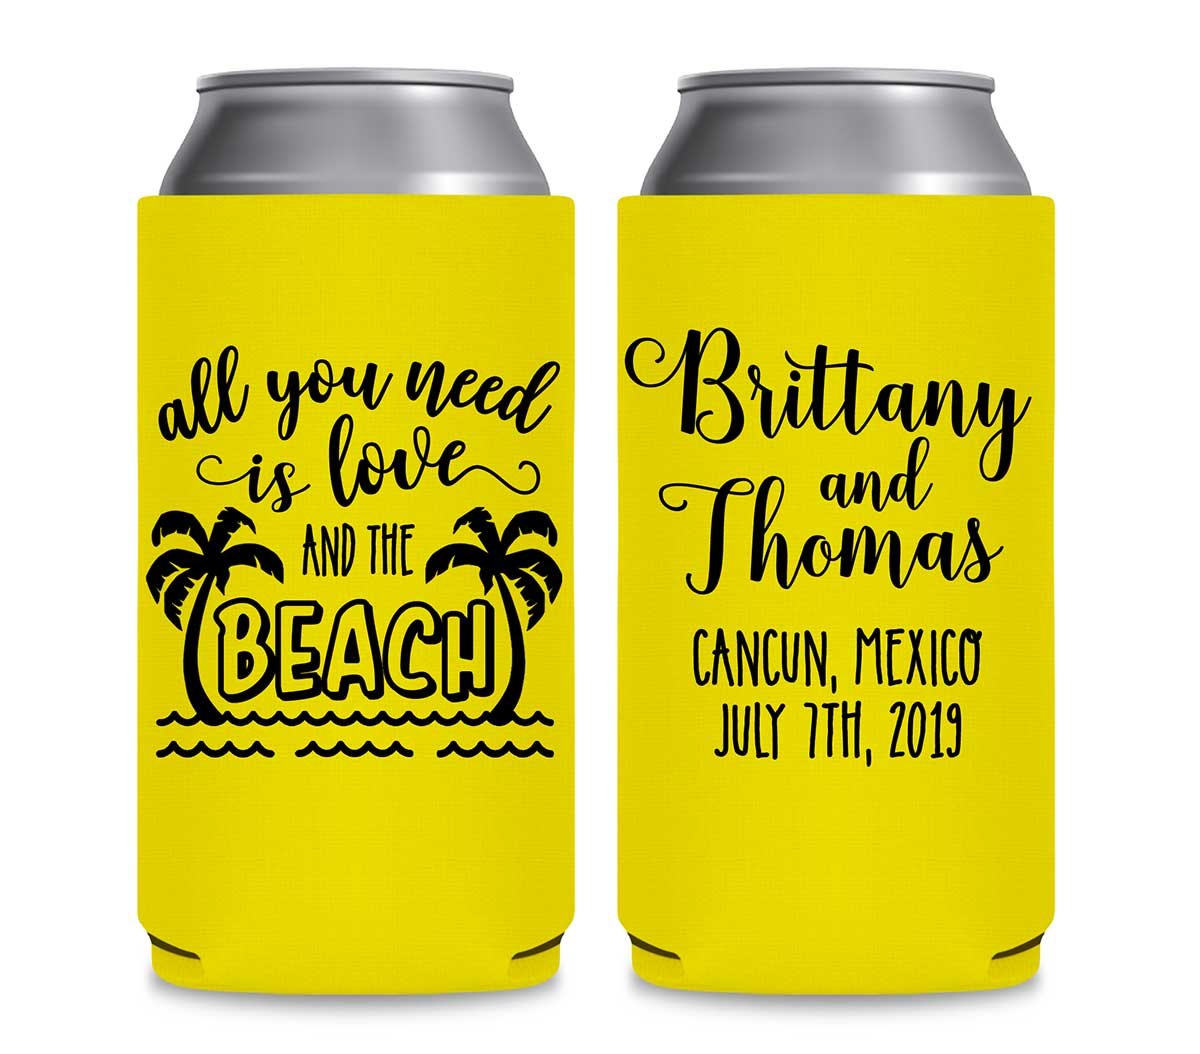 https://www.thatweddingshop.com/wp-content/uploads/2019/12/Love-And-The-Beach-1A-Collapsible-Foam-12oz-Slim-Can-Koozies-Summer-Wedding-Favors.jpg